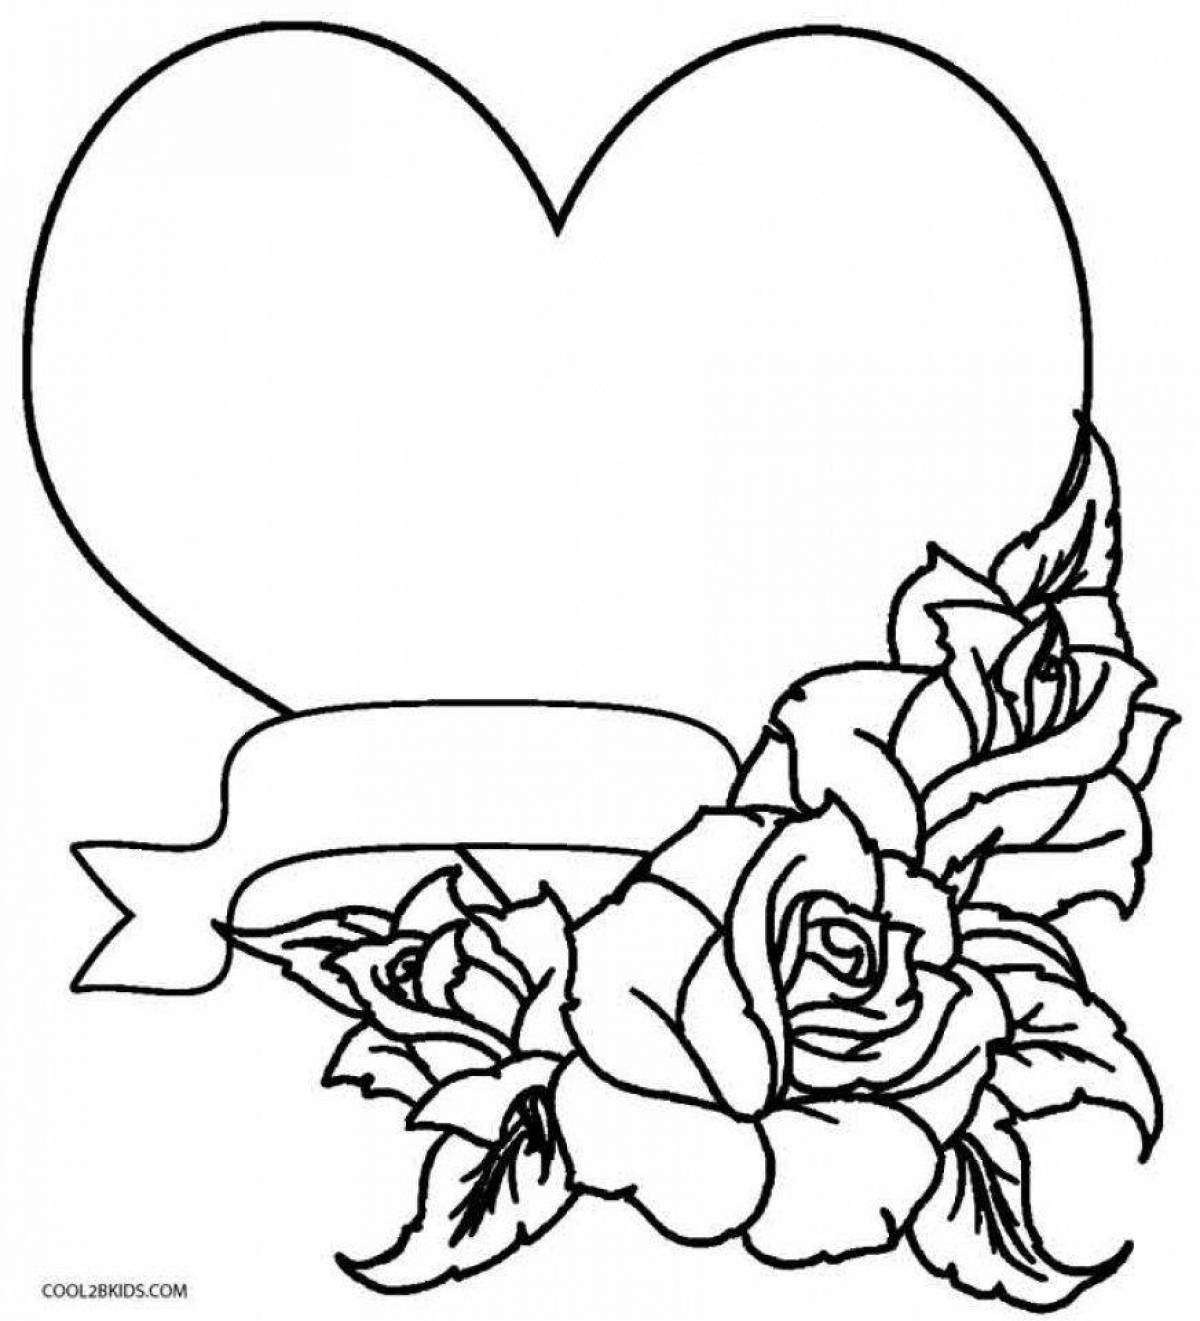 Fabulous teacher happy birthday coloring page